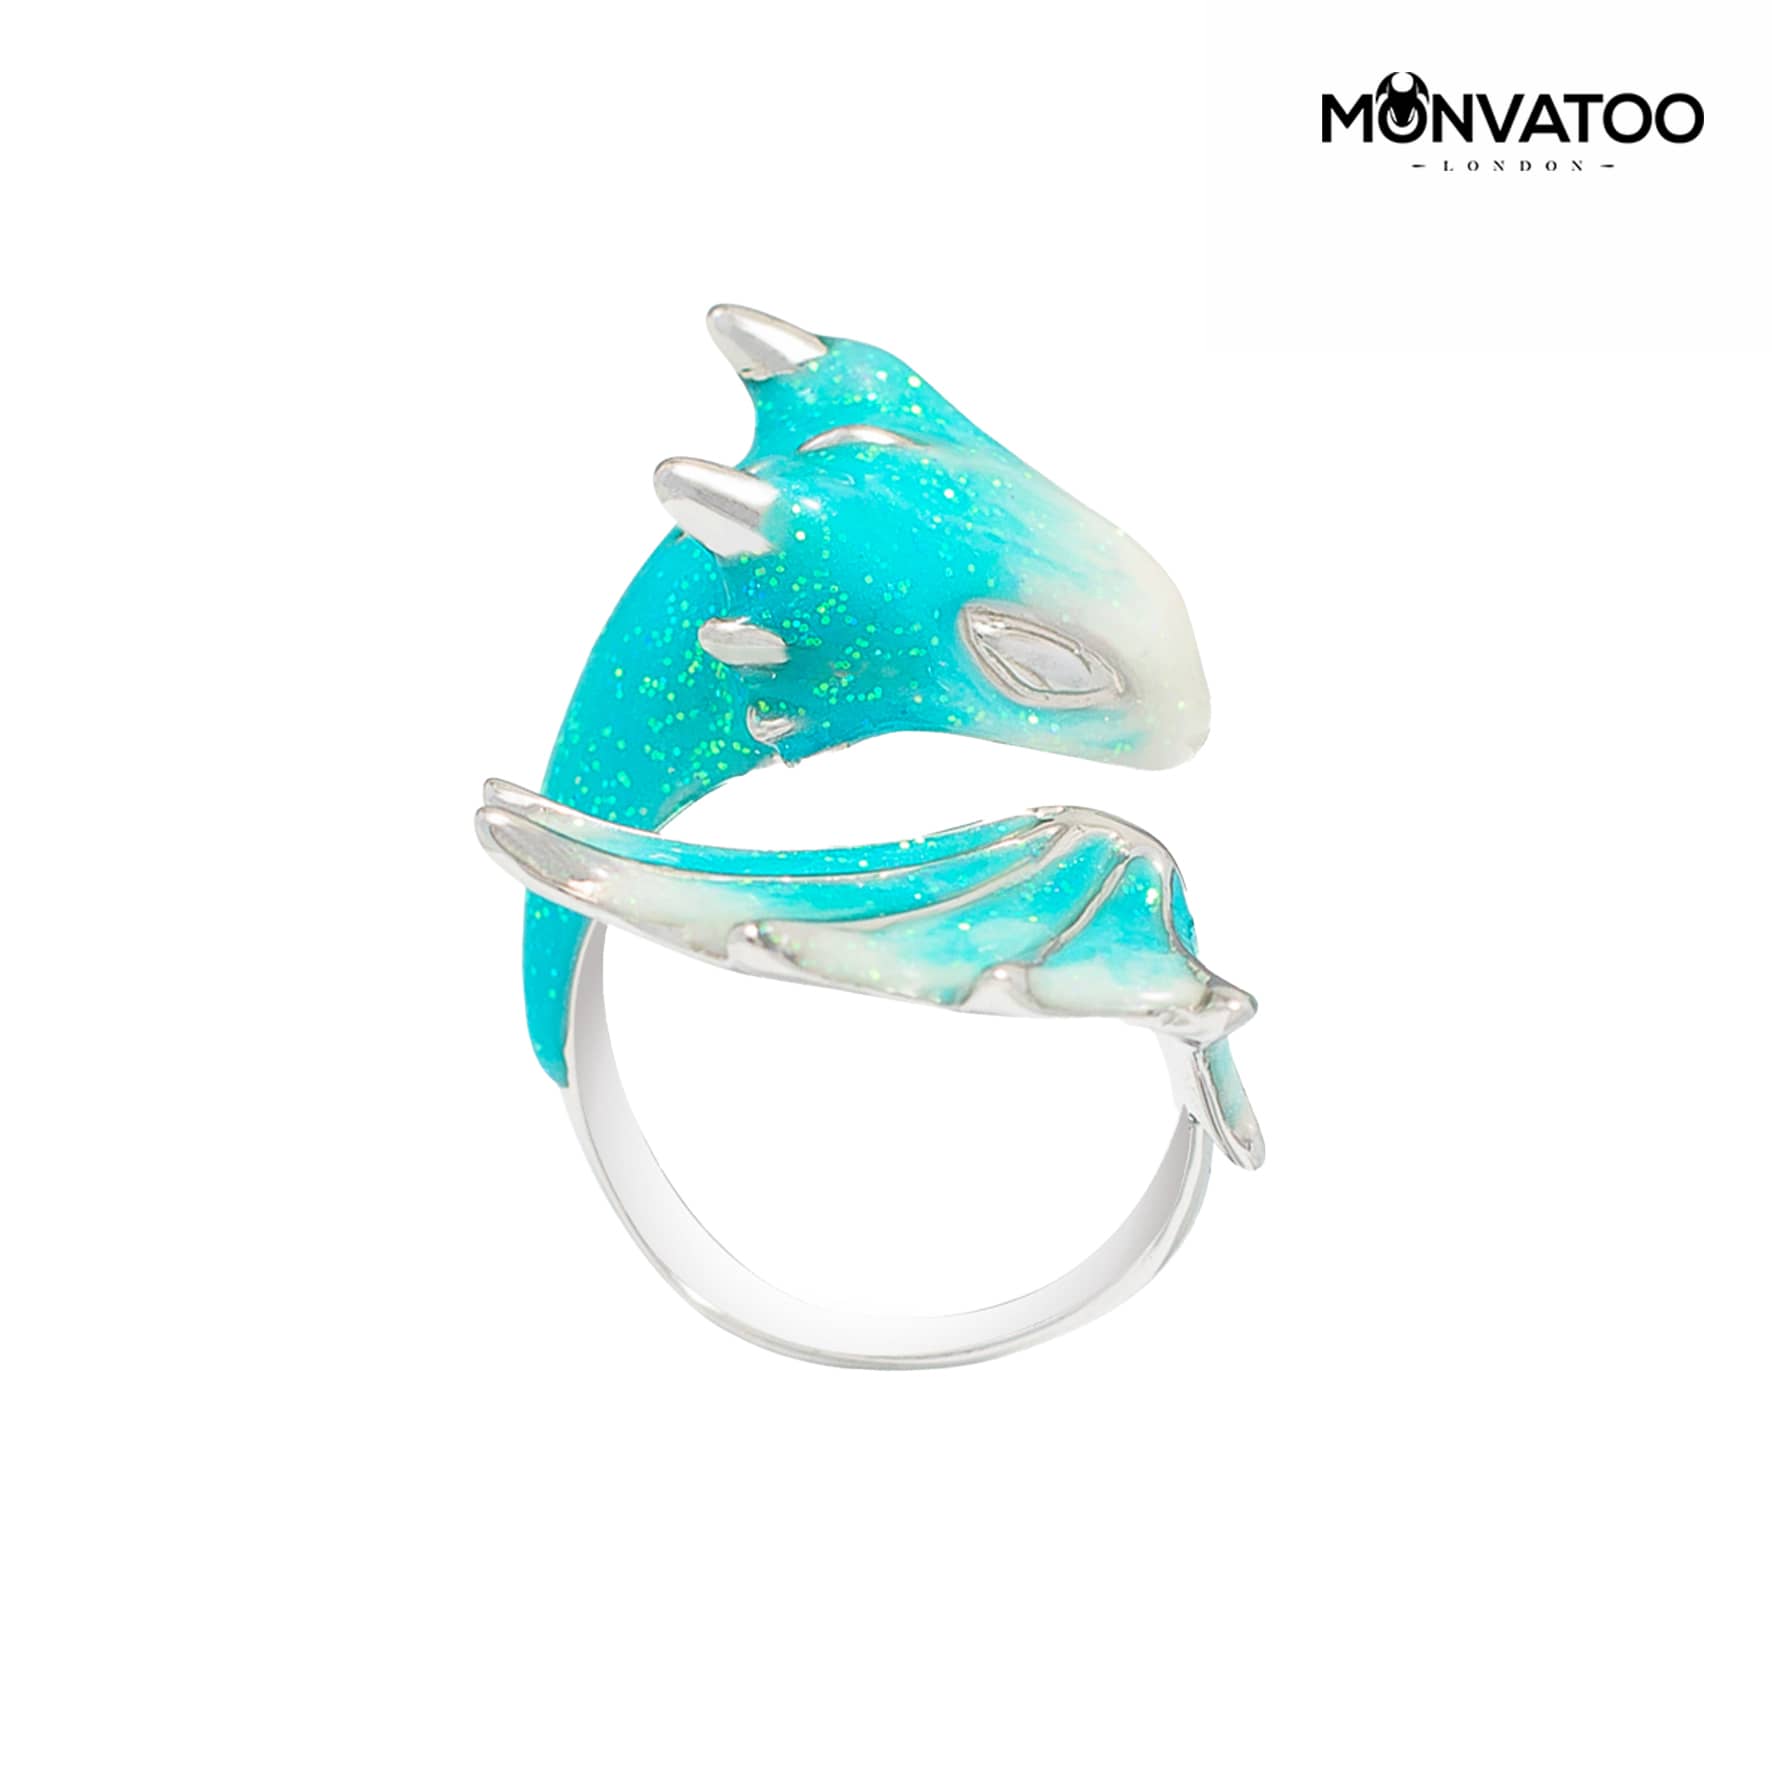 Silver turquoise dragon ring by MONVATOO London in a right side view perfect for fantasy lover